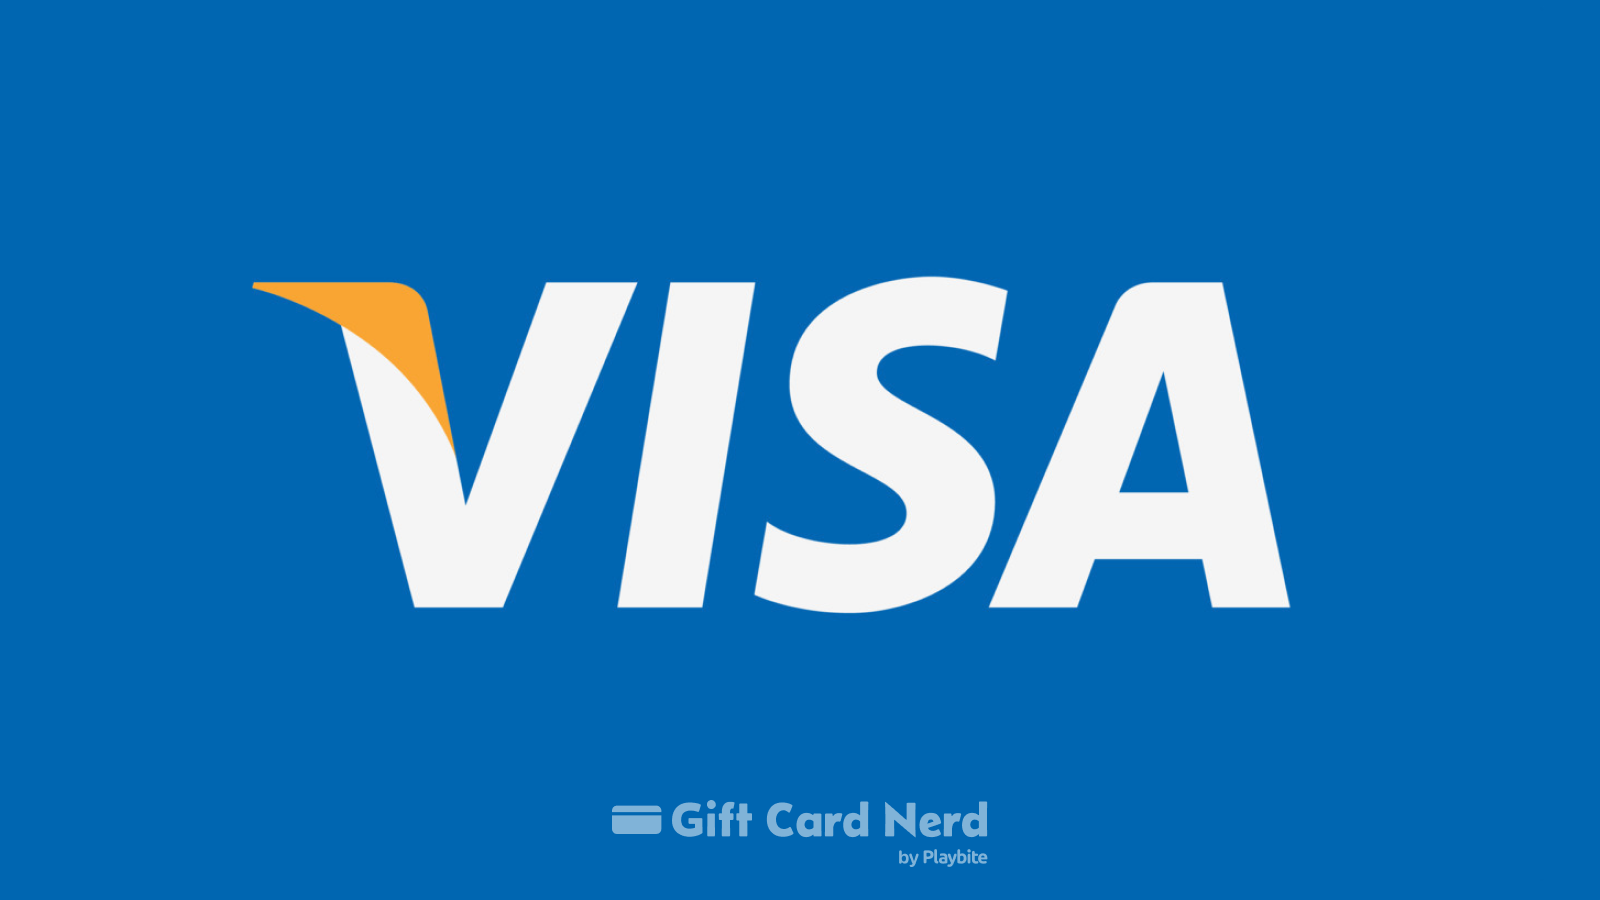 Does Target Sell Visa Gift Cards?